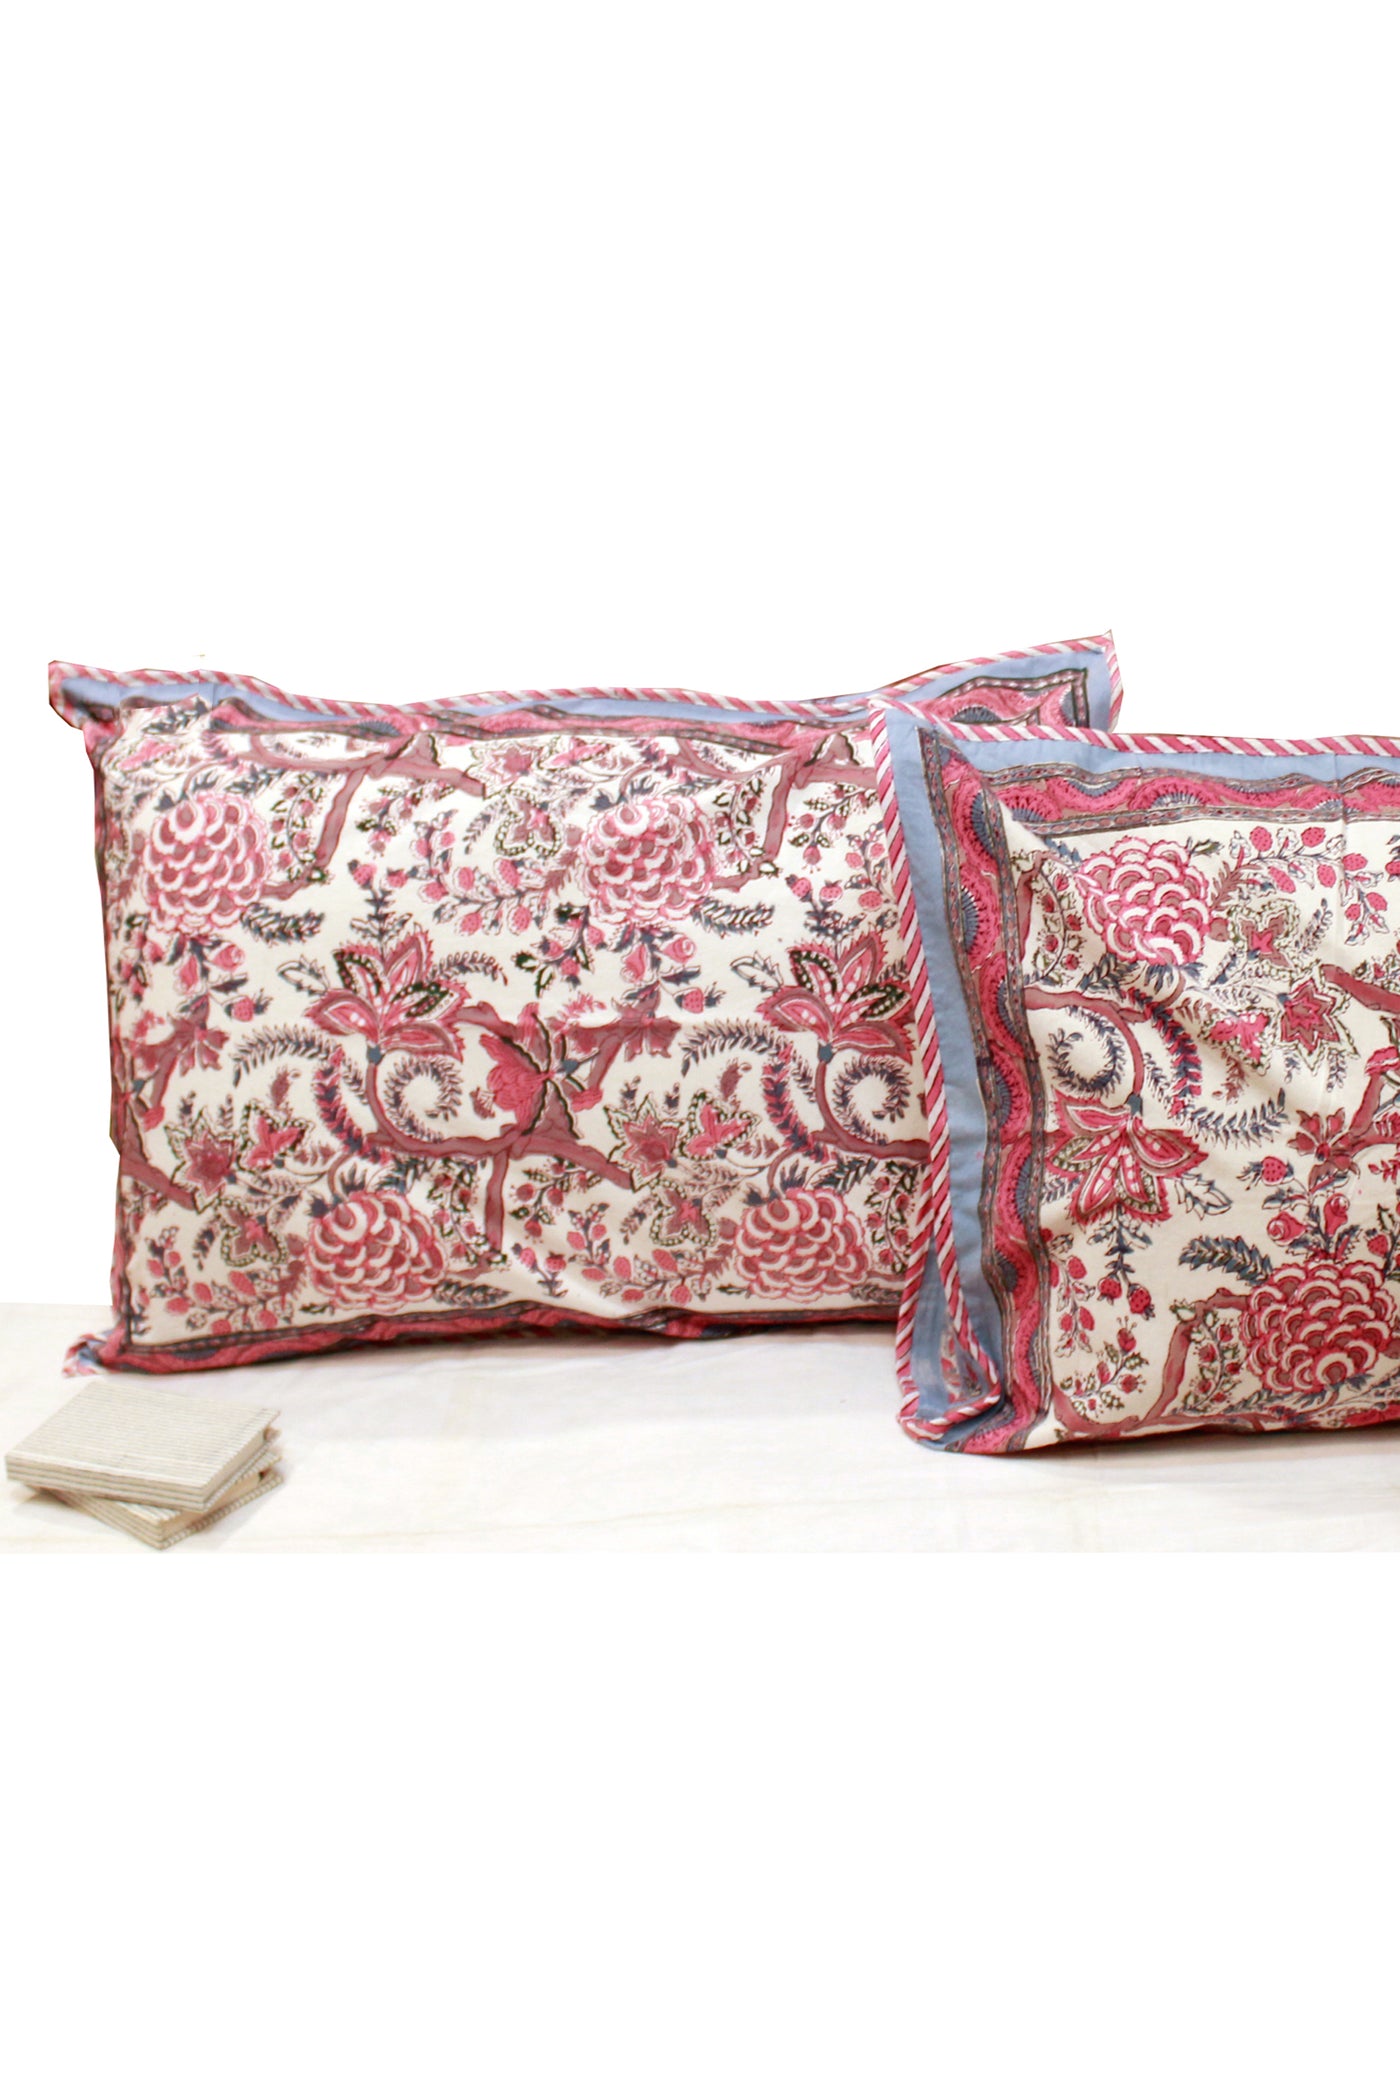 Cotton Big Flower Jaal Hand Block Printed Pillow Cover in Sea Blue and Pink